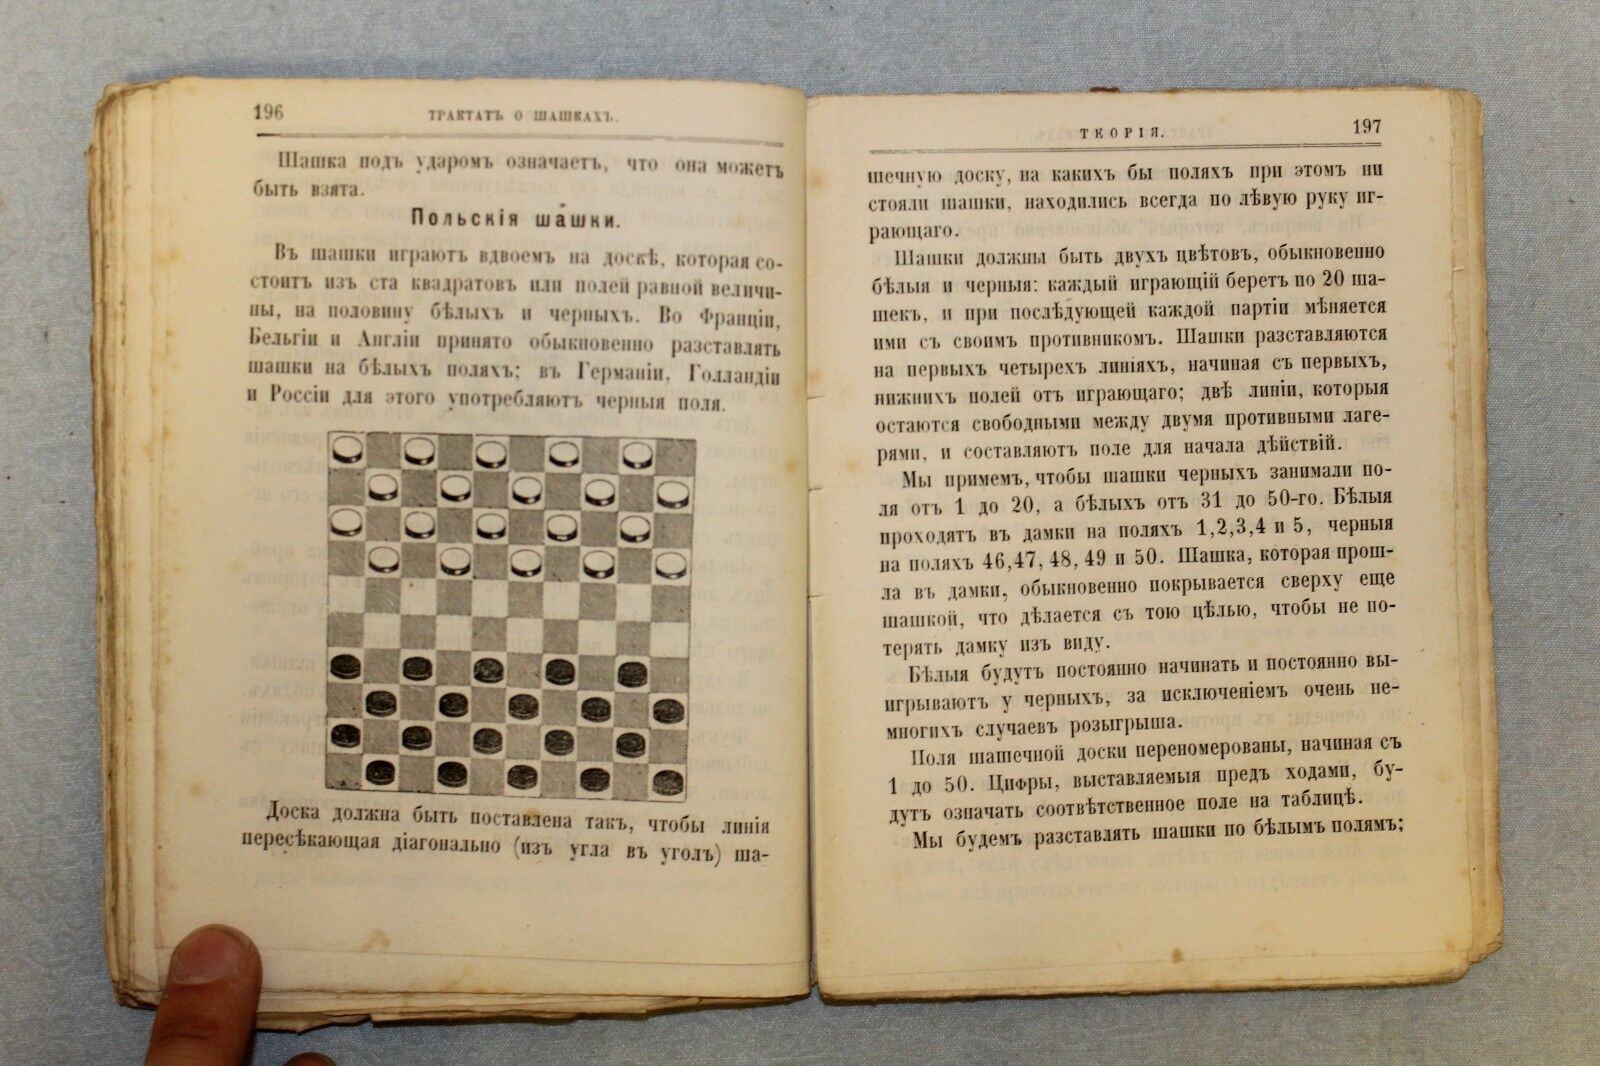 11898.Tutorial to the Newly-Discovered Art in the Chess Game.1879.Rare in native cover